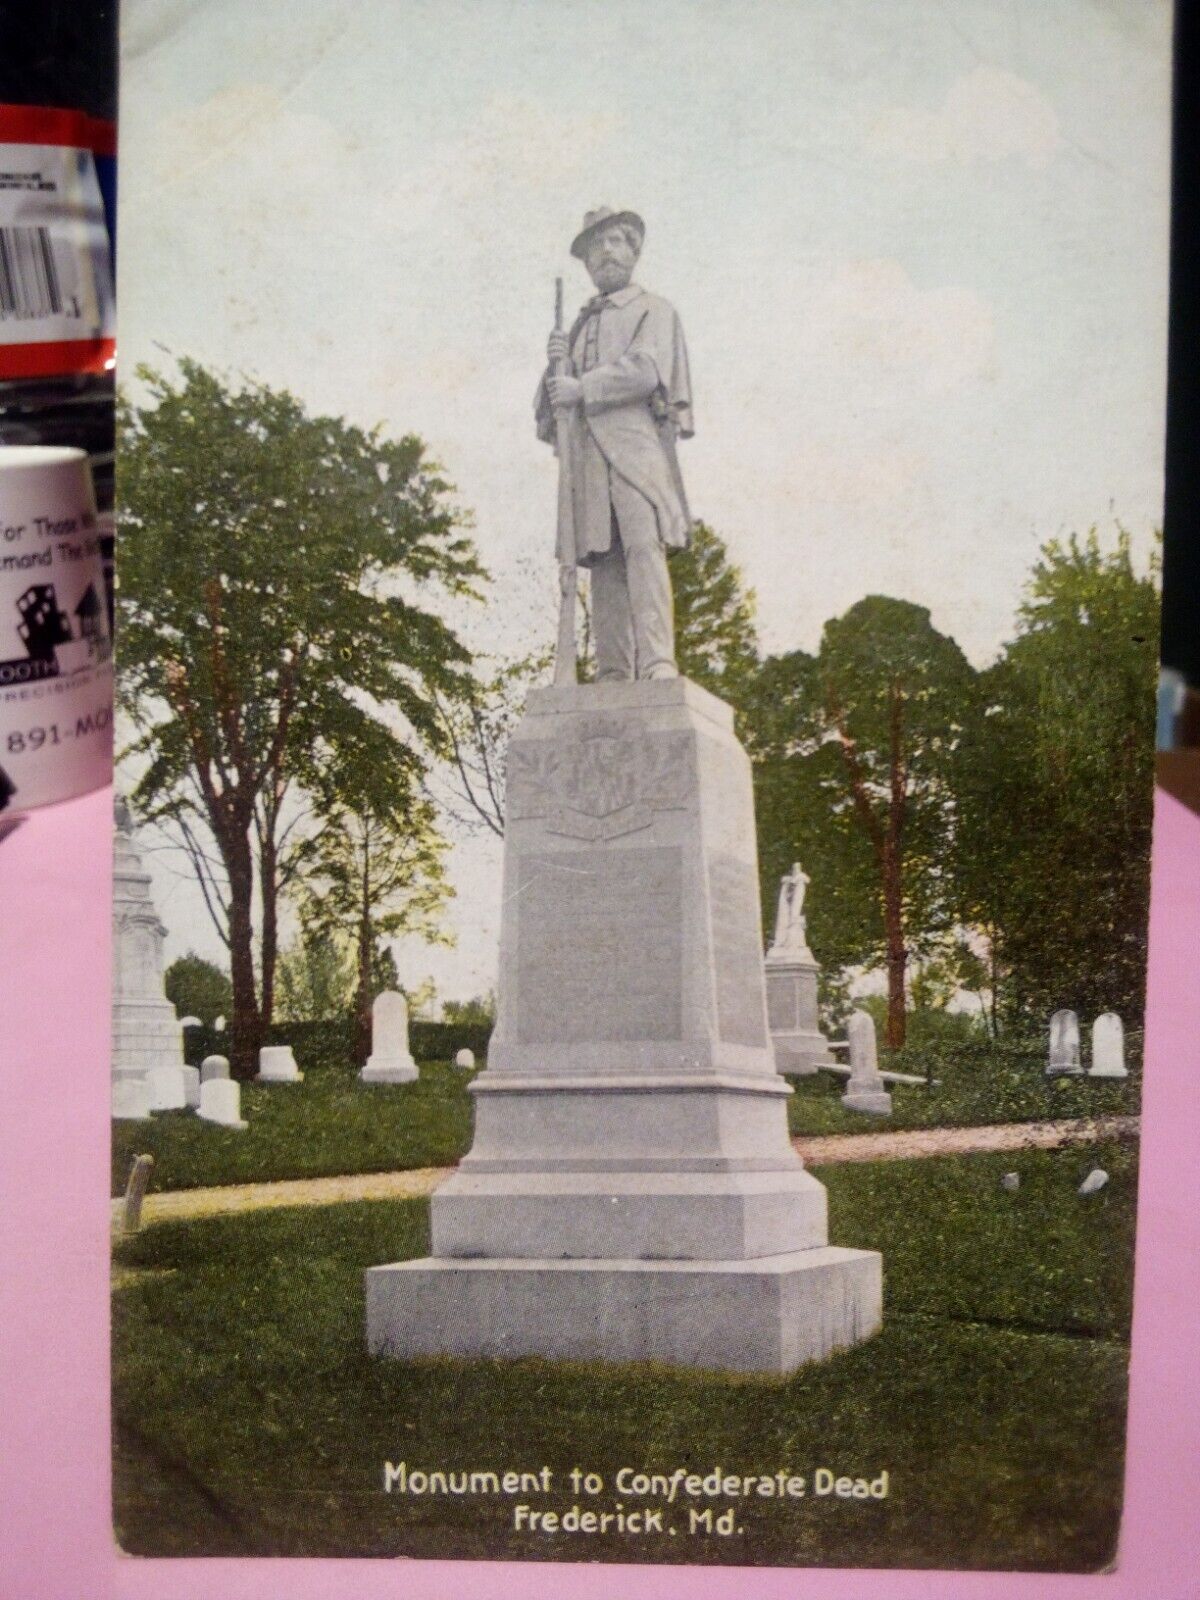 Frederick Maryland monument to Confederate Dead cemetery statue Civil War